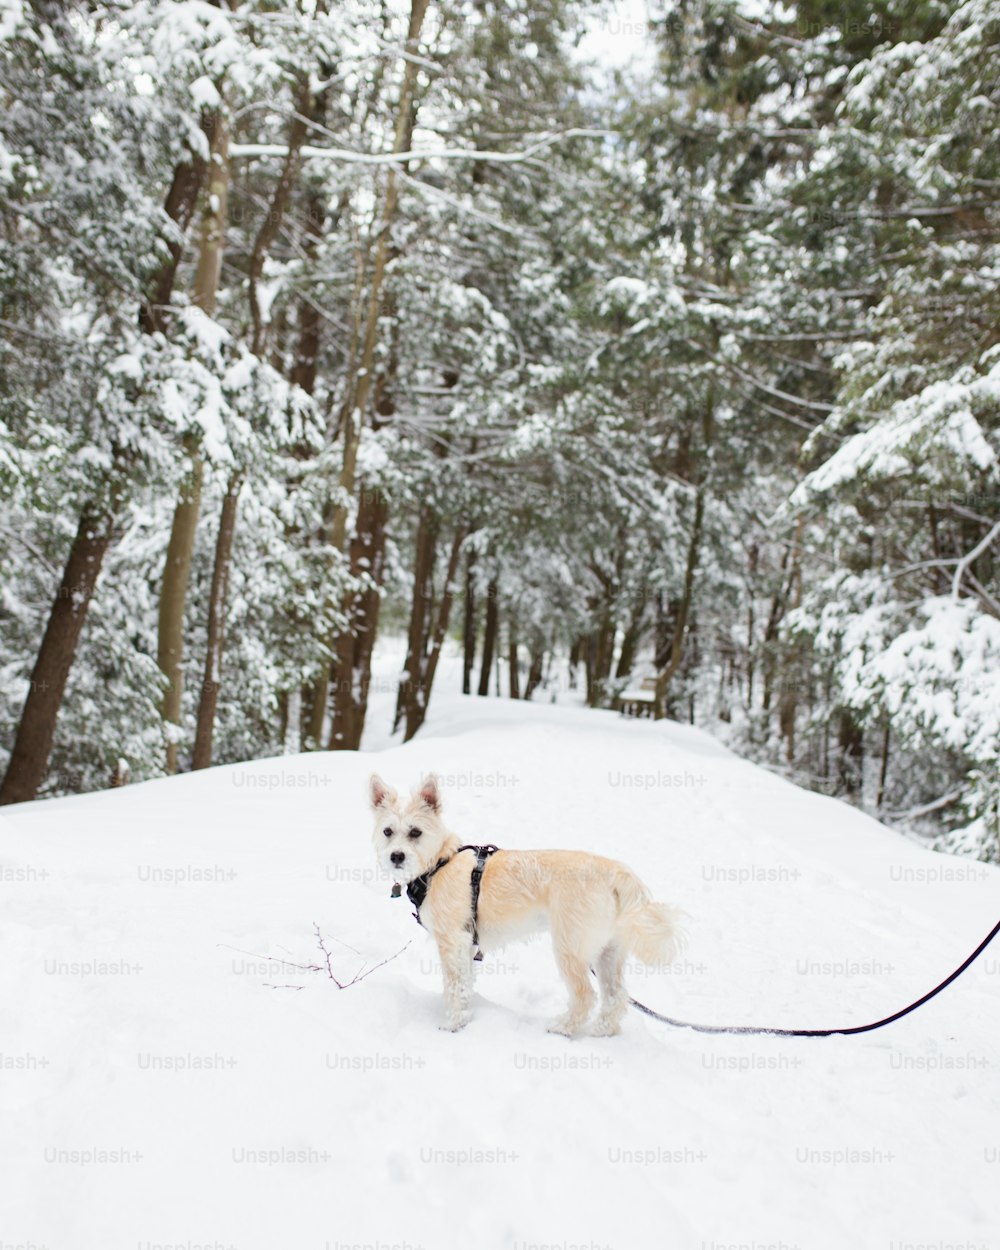 a dog on a leash in the snow